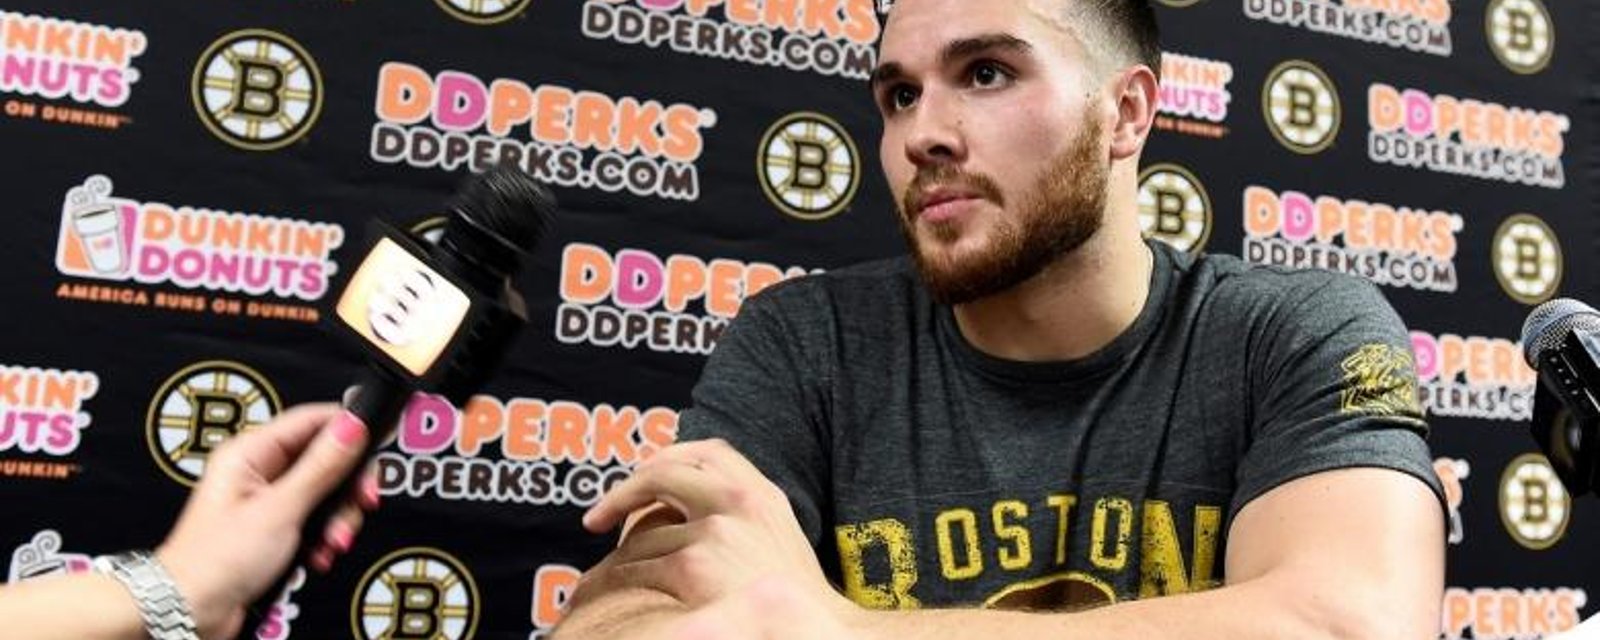 The Bruins have placed their infamous tough guy on waivers.